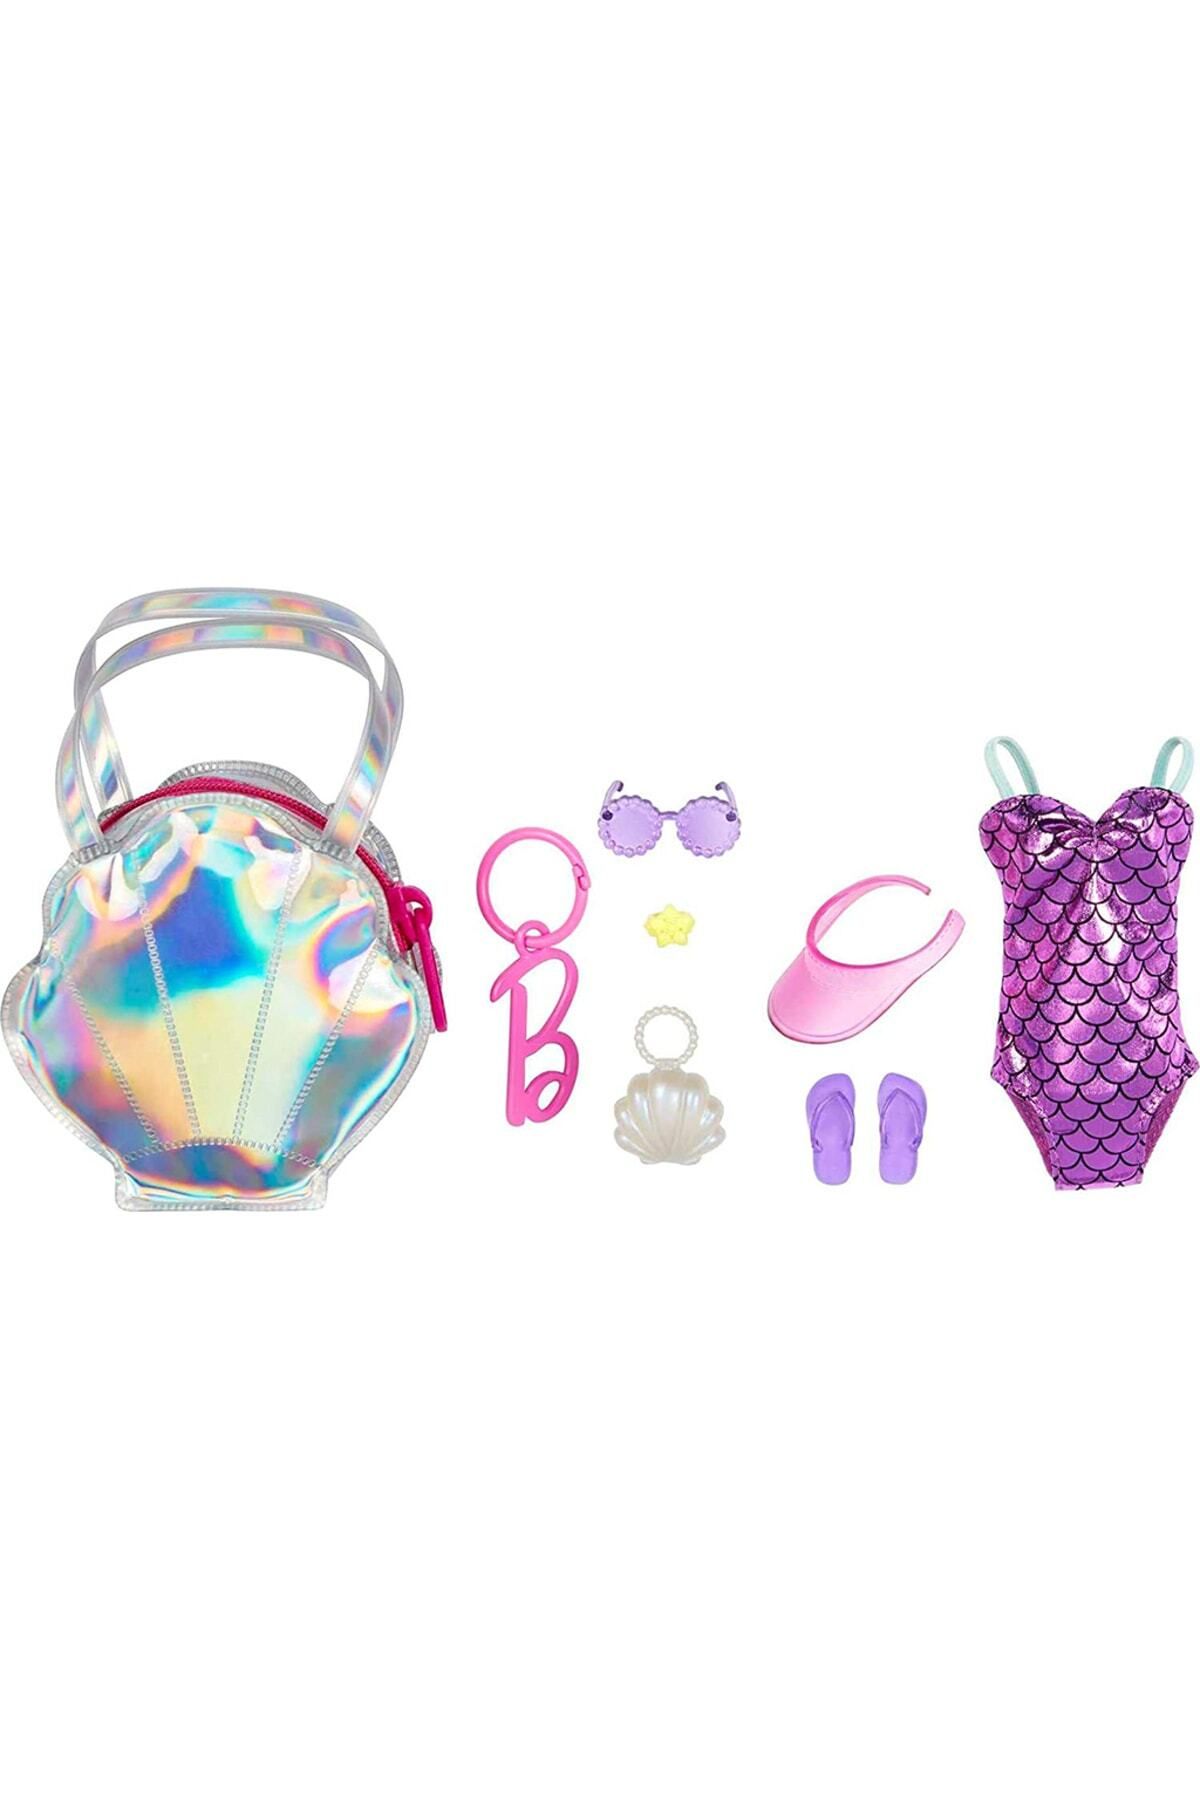 Cici Oyuncak Deluxe Clip-On Beach Bag with Swimsuit and Five Themed Accessories Barbie Aksesuar